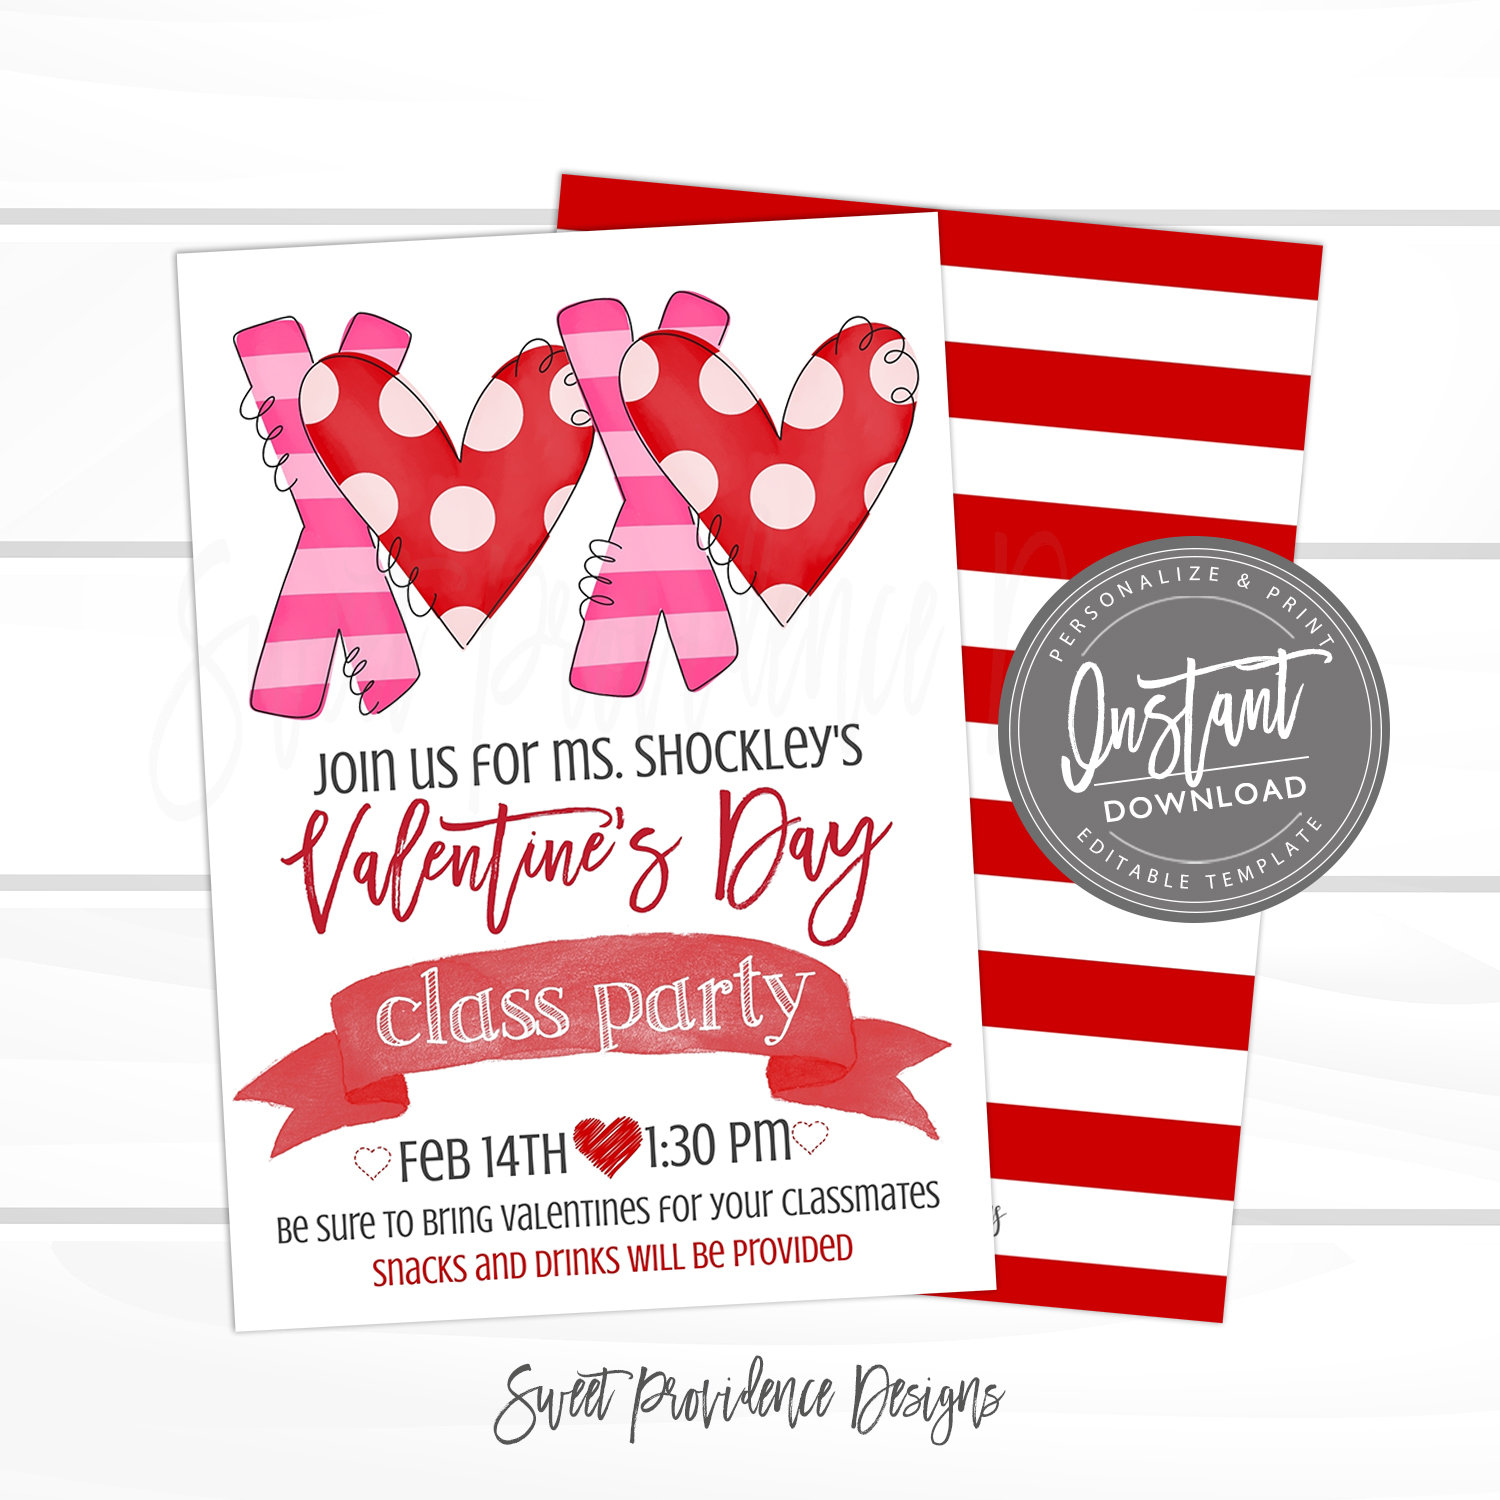 valentine-s-day-class-party-invitation-sweet-providence-designs